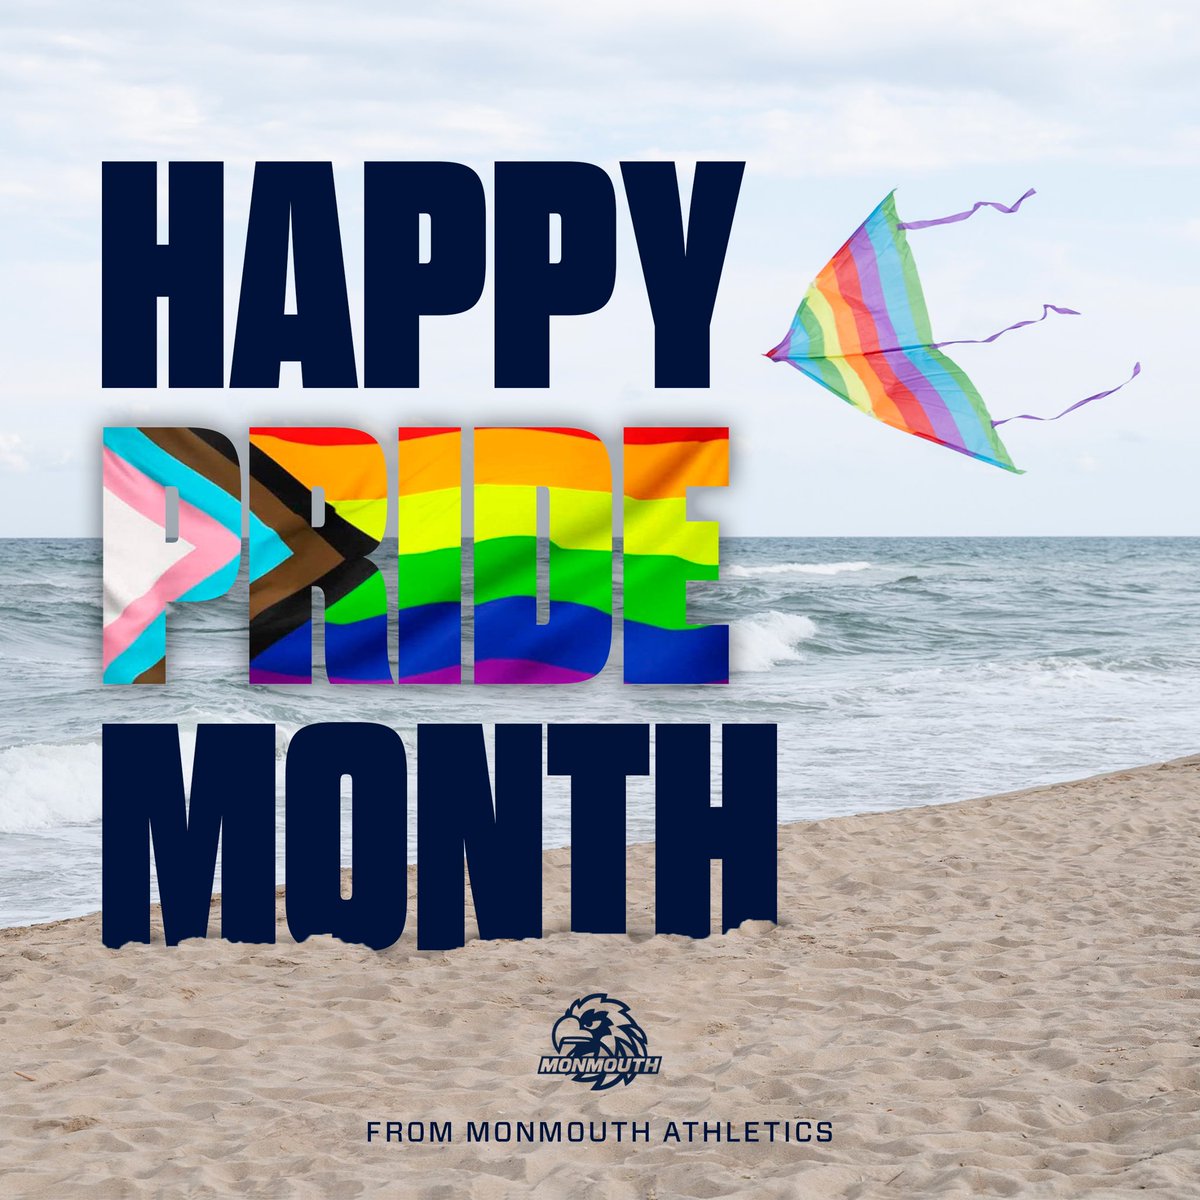 Love wins because it knows no boundaries. Happy #PrideMonth from the Hawks! #FlyHawks 🏳️‍🌈🏳️‍⚧️